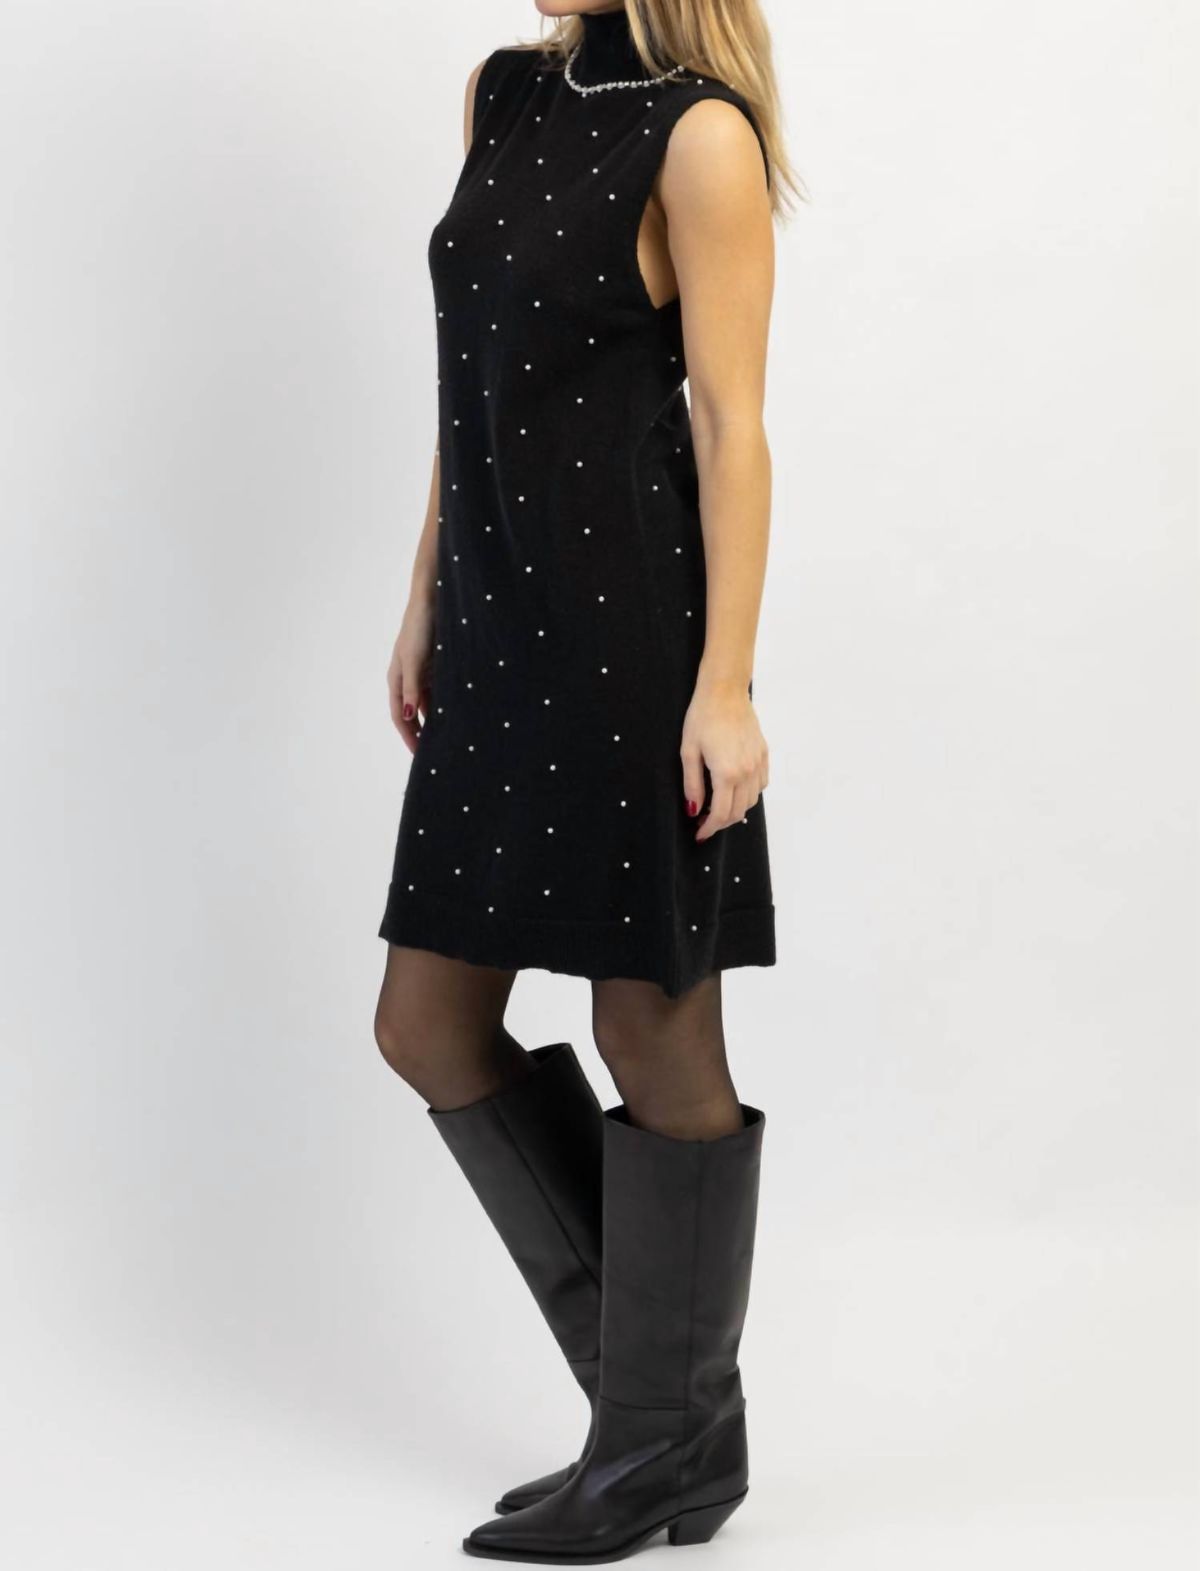 Style 1-4172124261-2901 SUNDAYUP Size M High Neck Sequined Black Cocktail Dress on Queenly